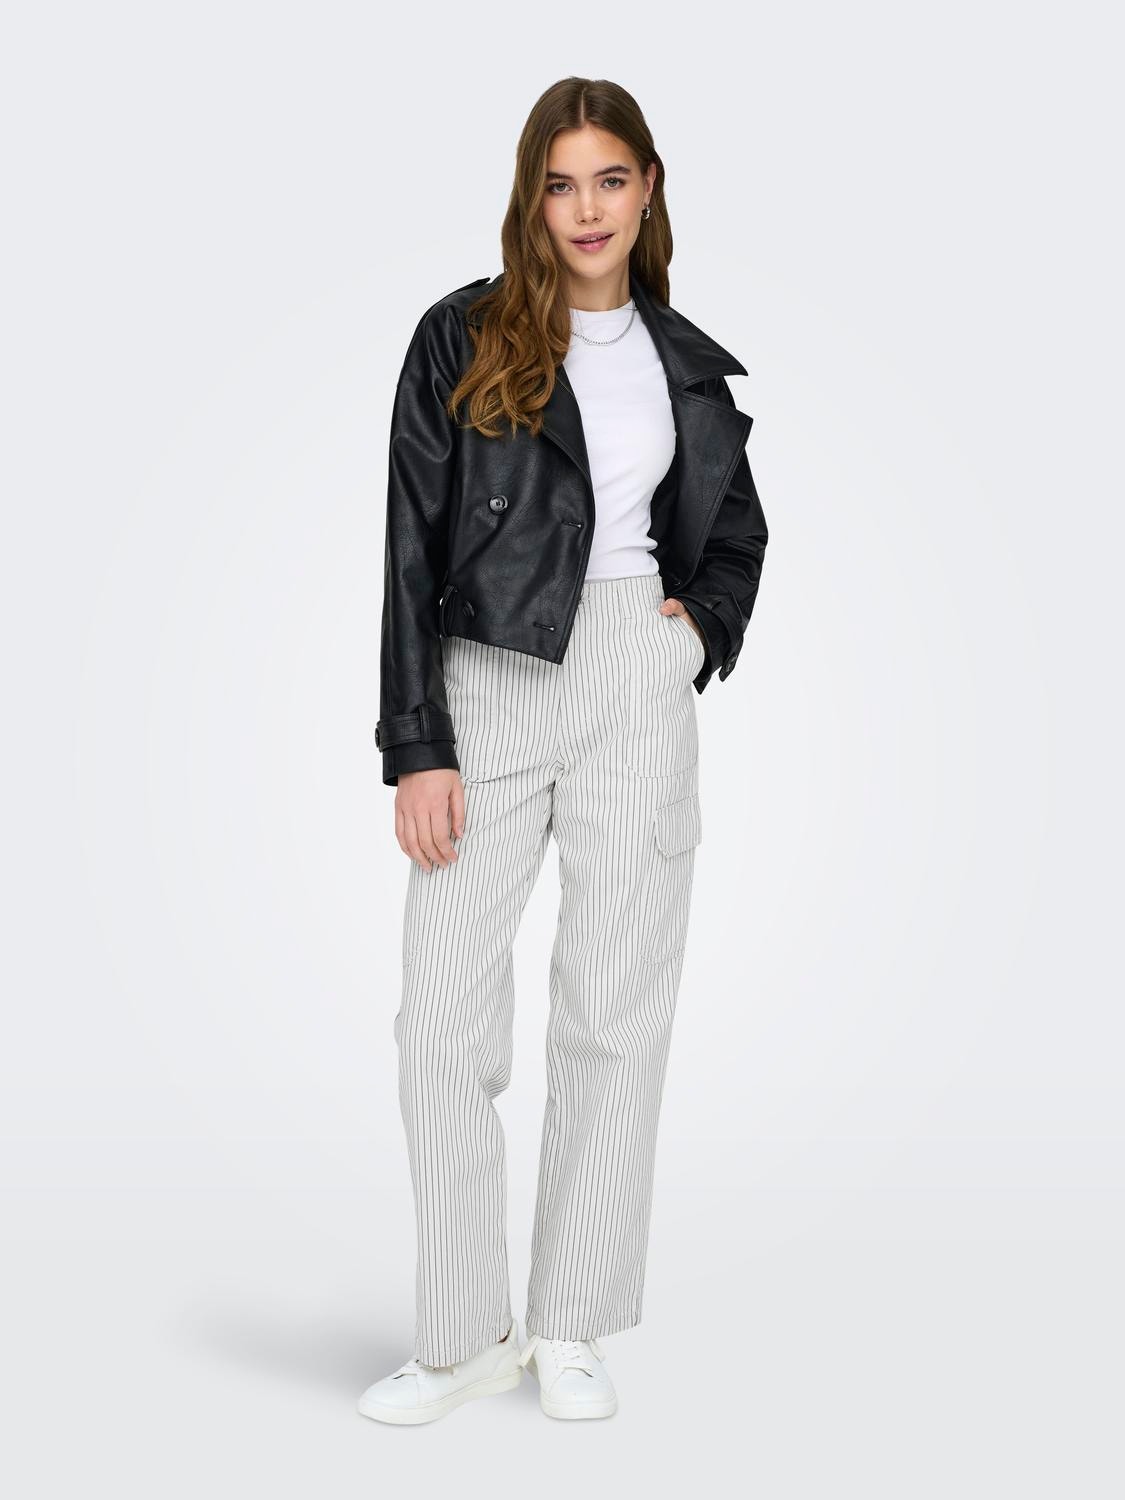 ONLY Loose fit cargo trousers -Cloud Dancer - 15314913